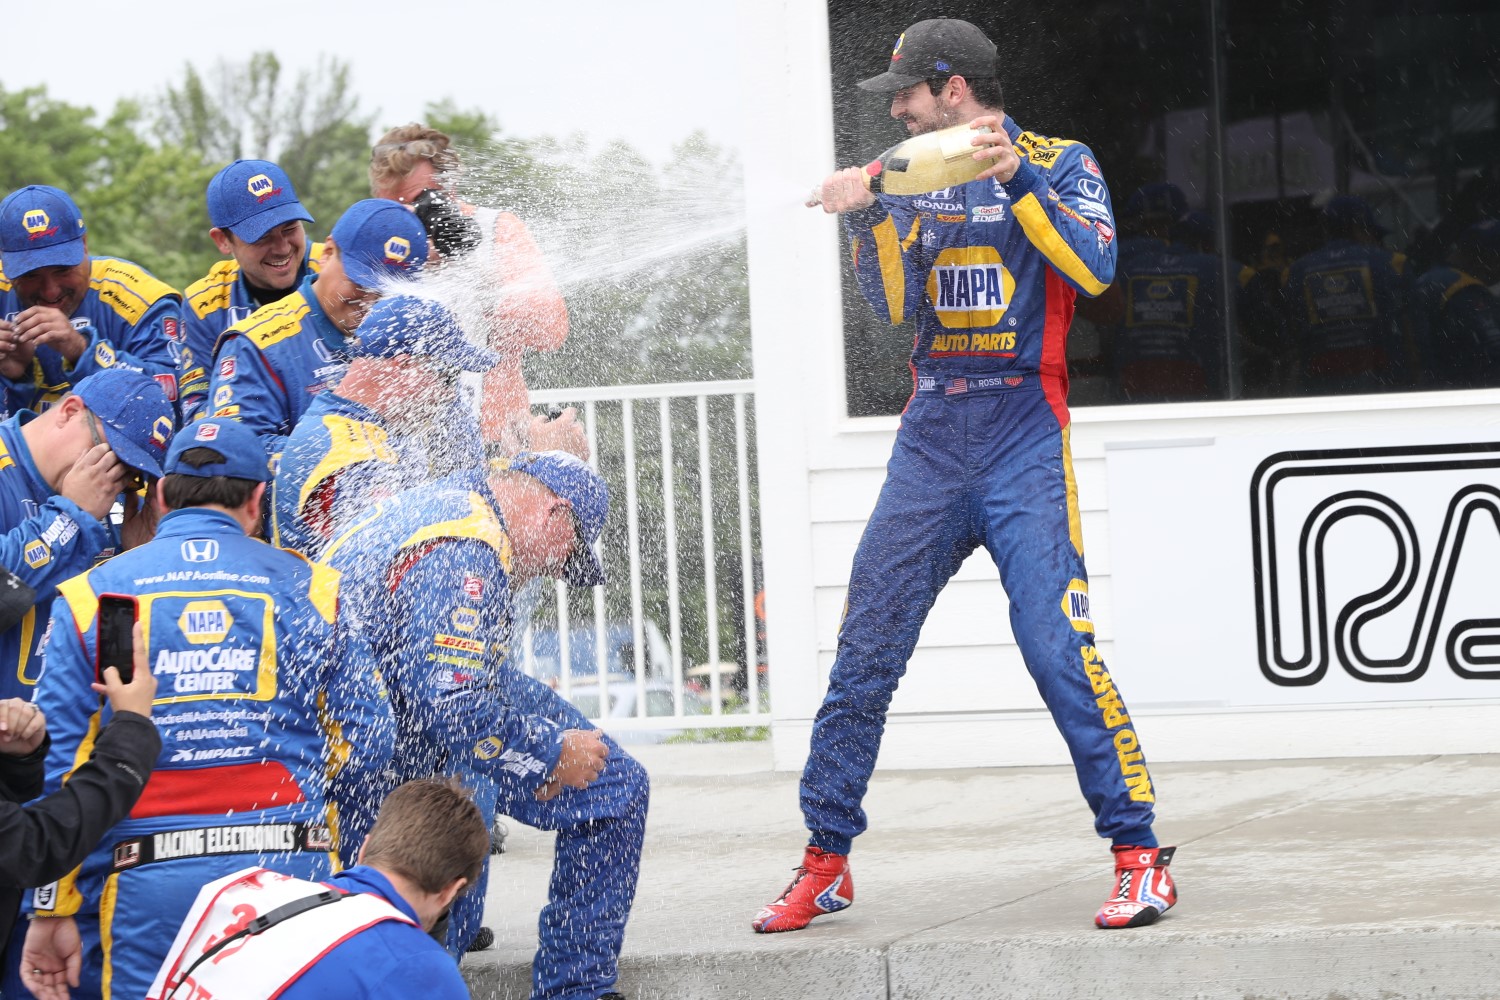 Rossi showers his crew with Champagne